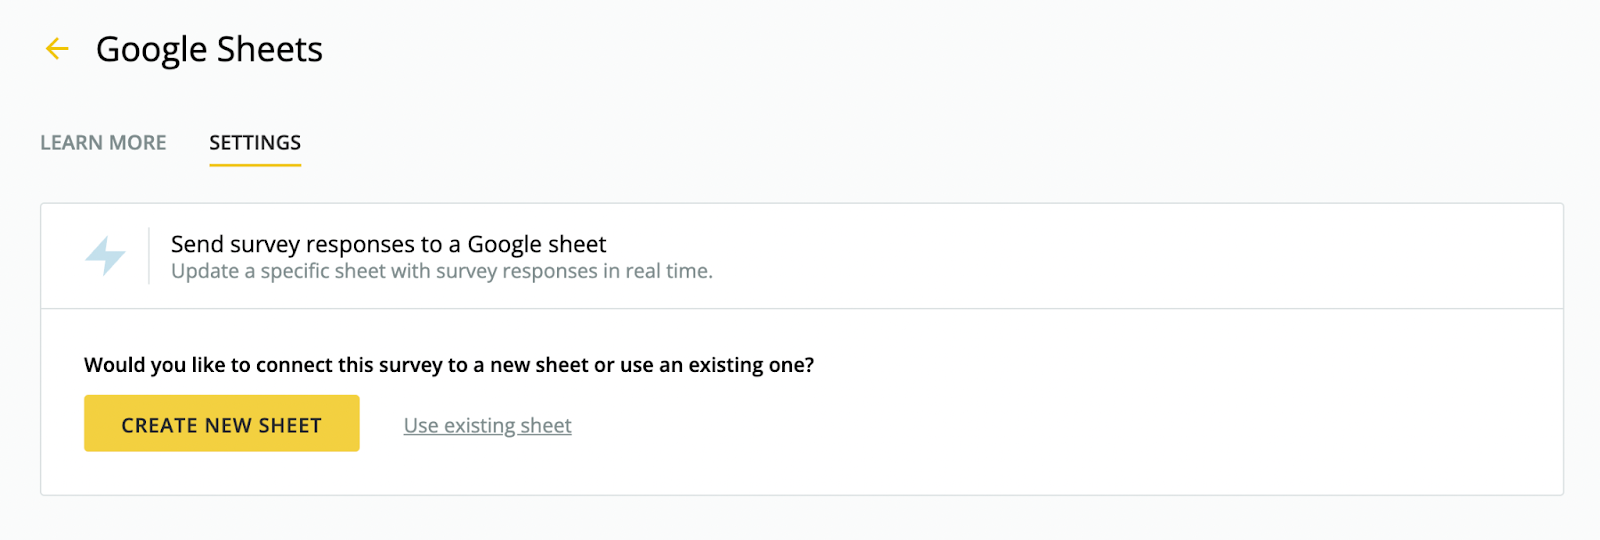 send survey responses with Google Sheets and Zapier